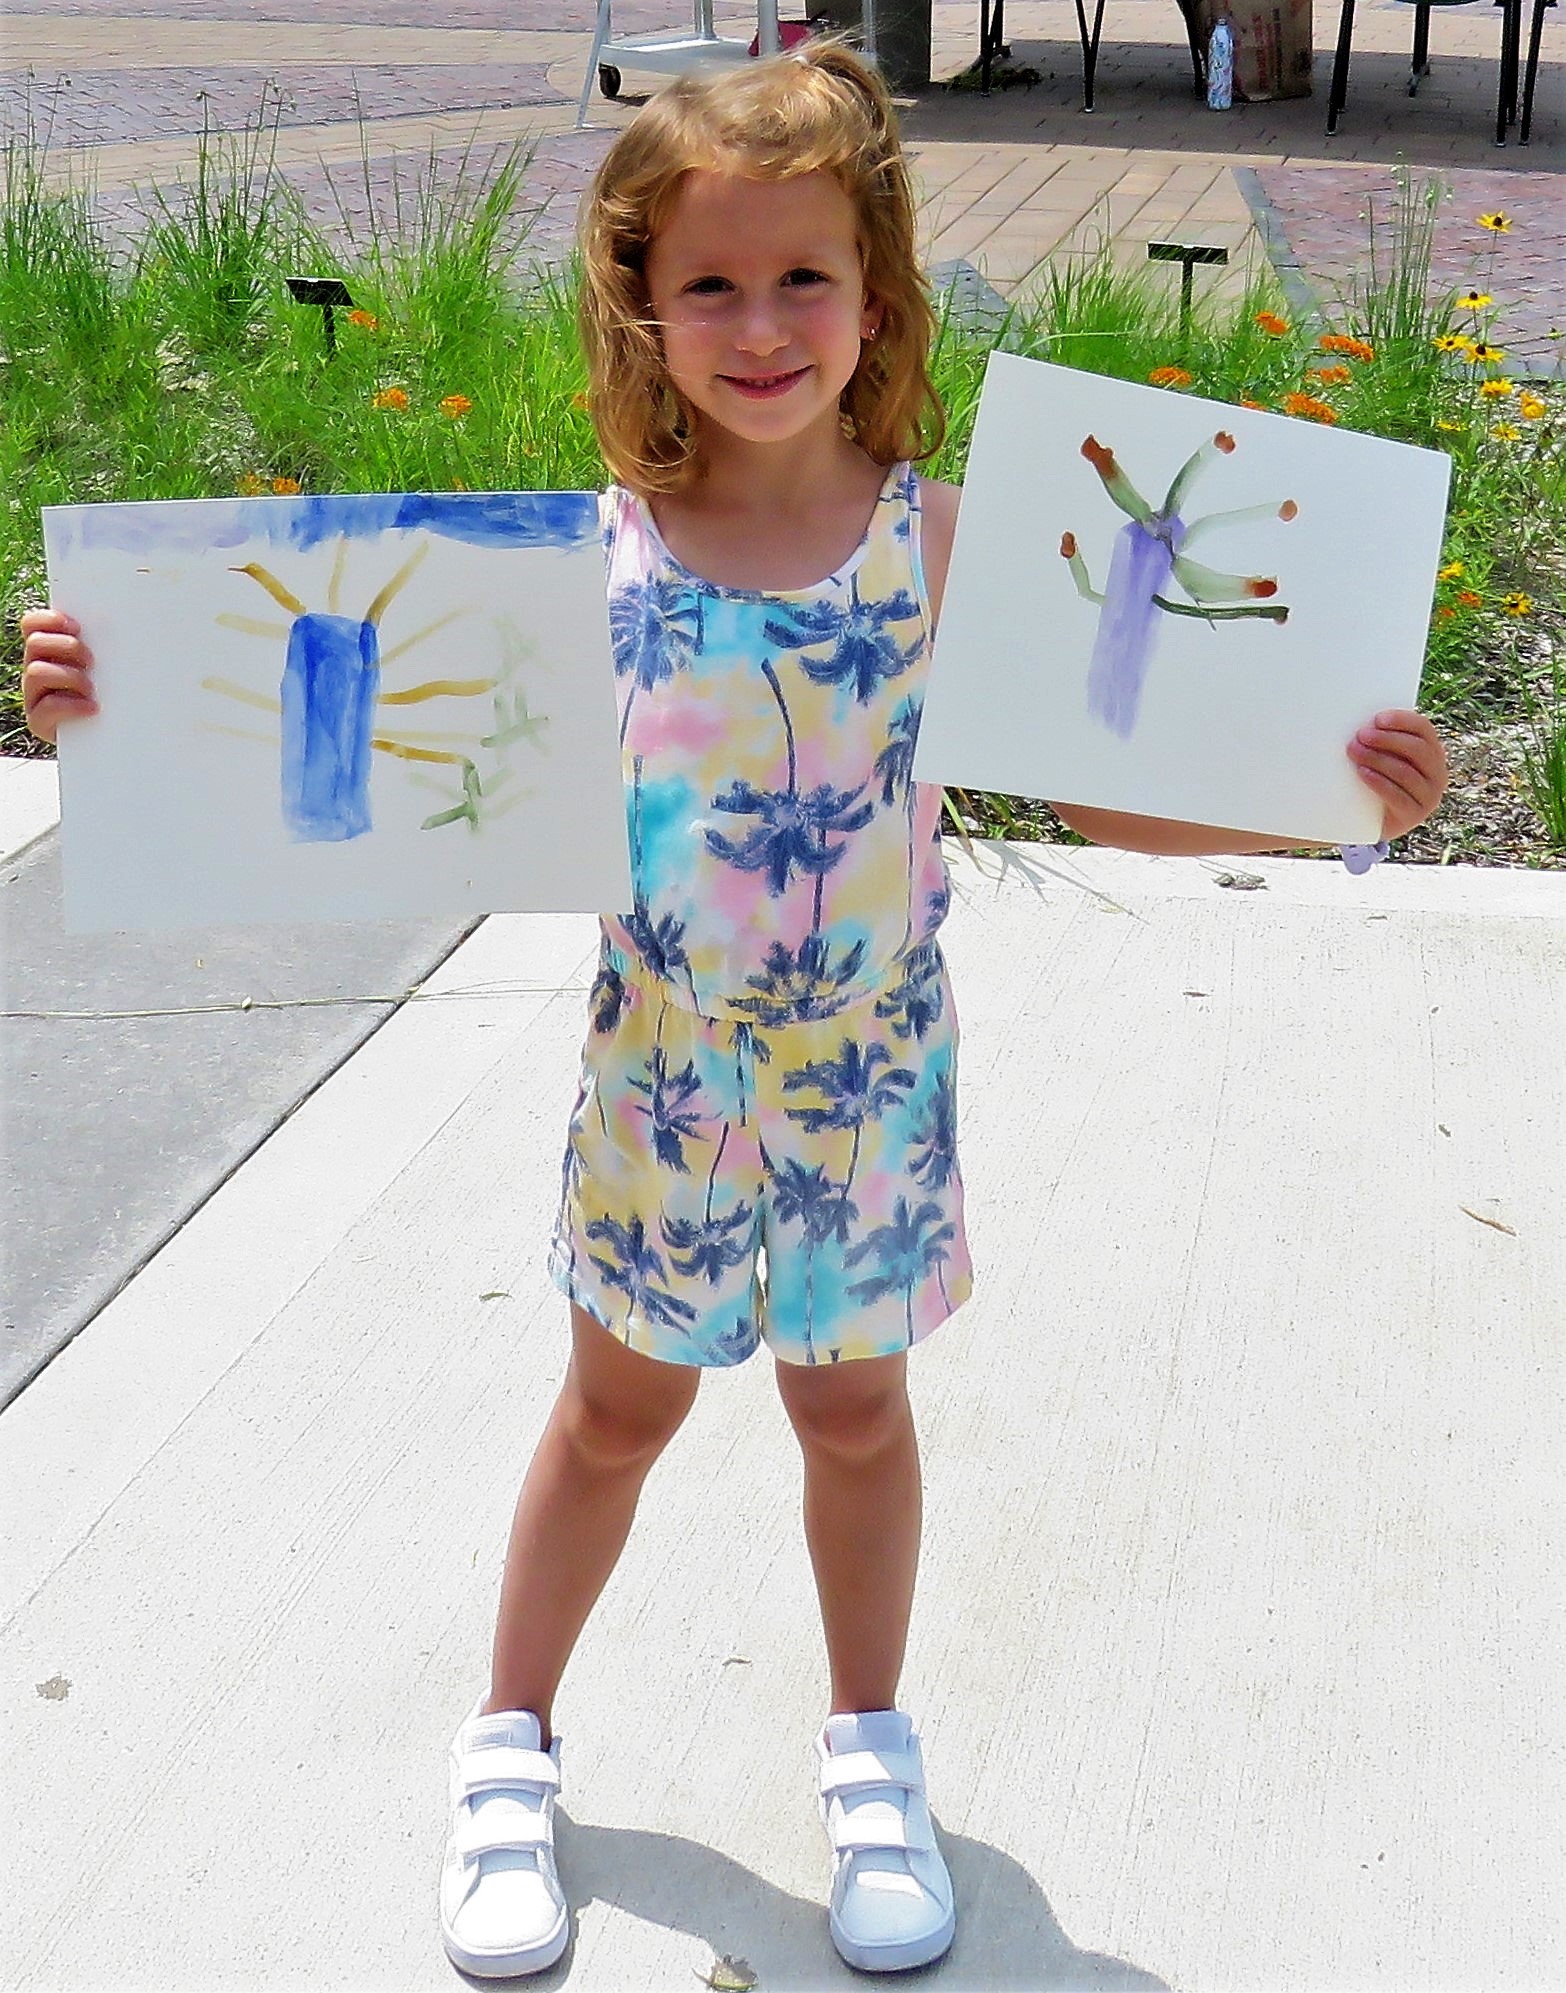 Young girl with strawberry blonde hair holding two botanical art projects she created featuring trees. She is standing in a garden.